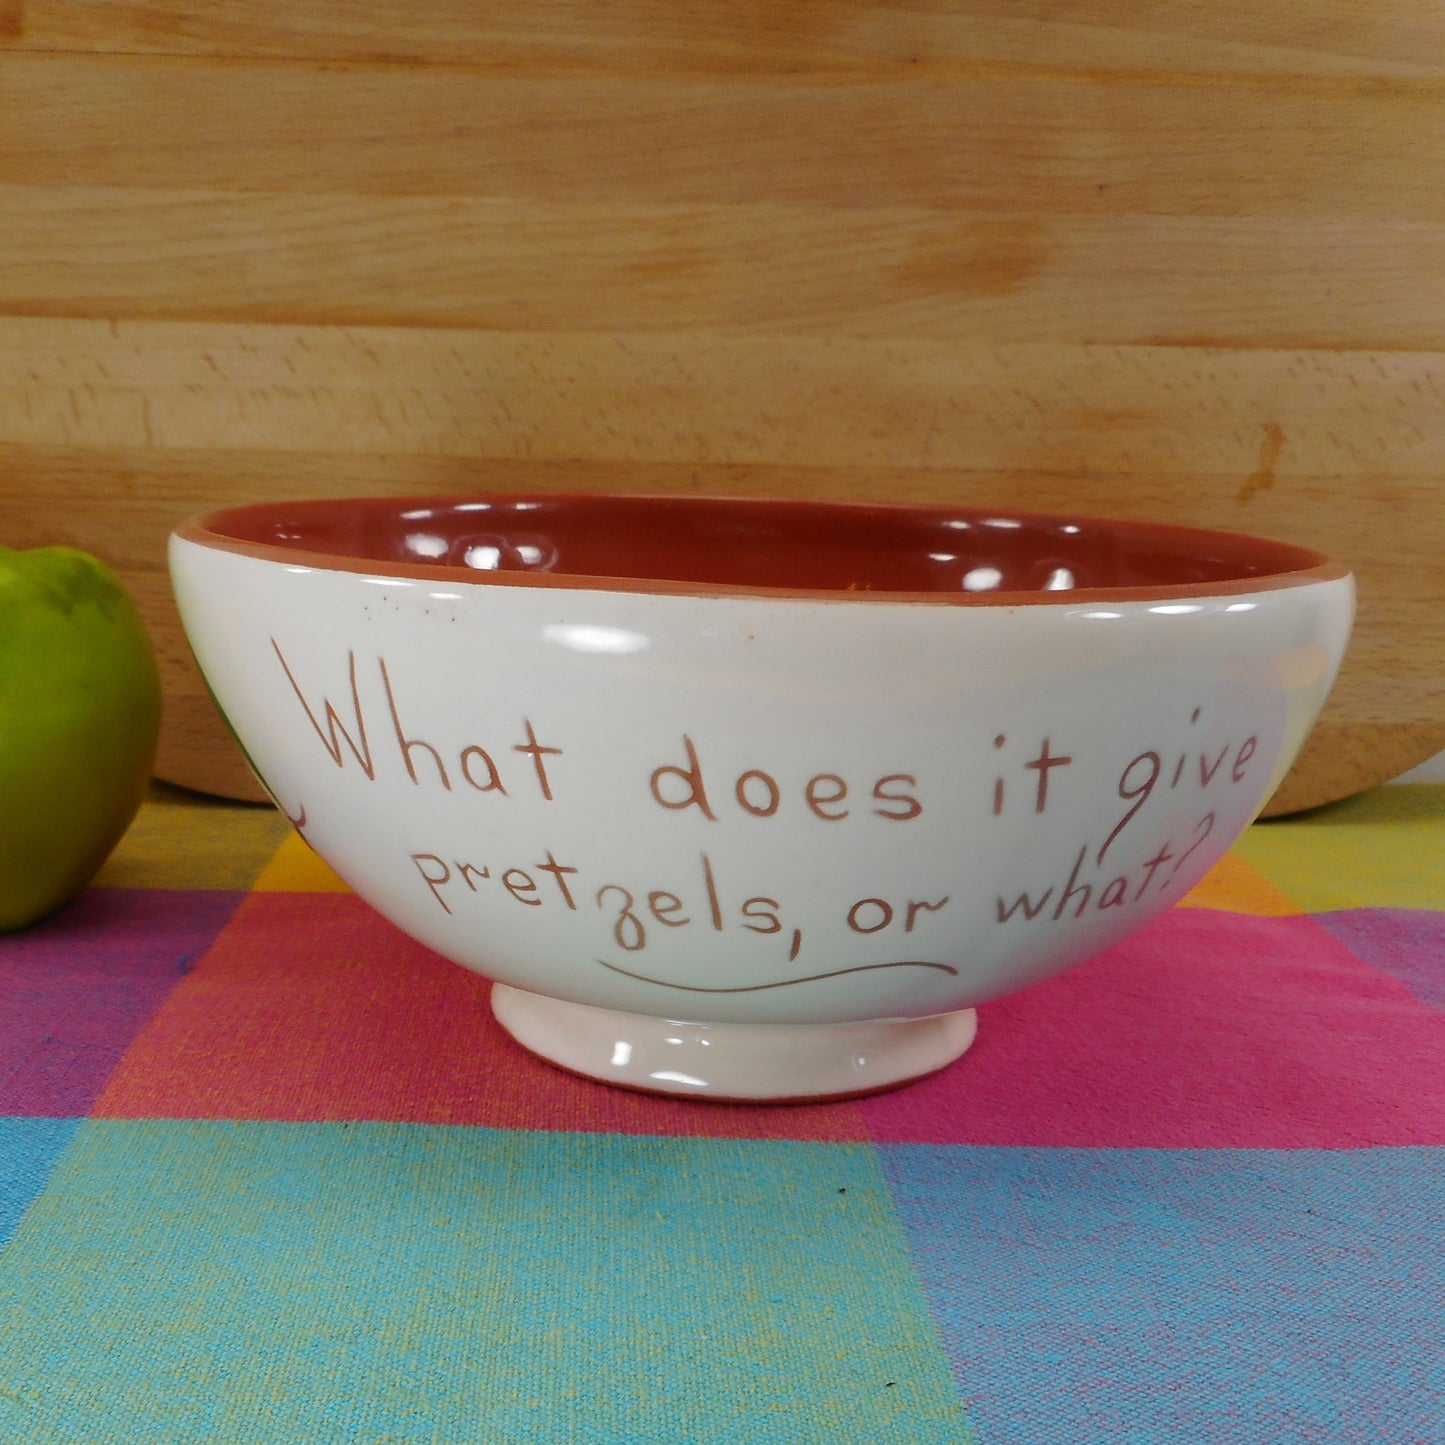 Ruth Price Pottery Pennsylvania Dutch Amish Mottoware Bowl - What Does it Give Pretzels or What?